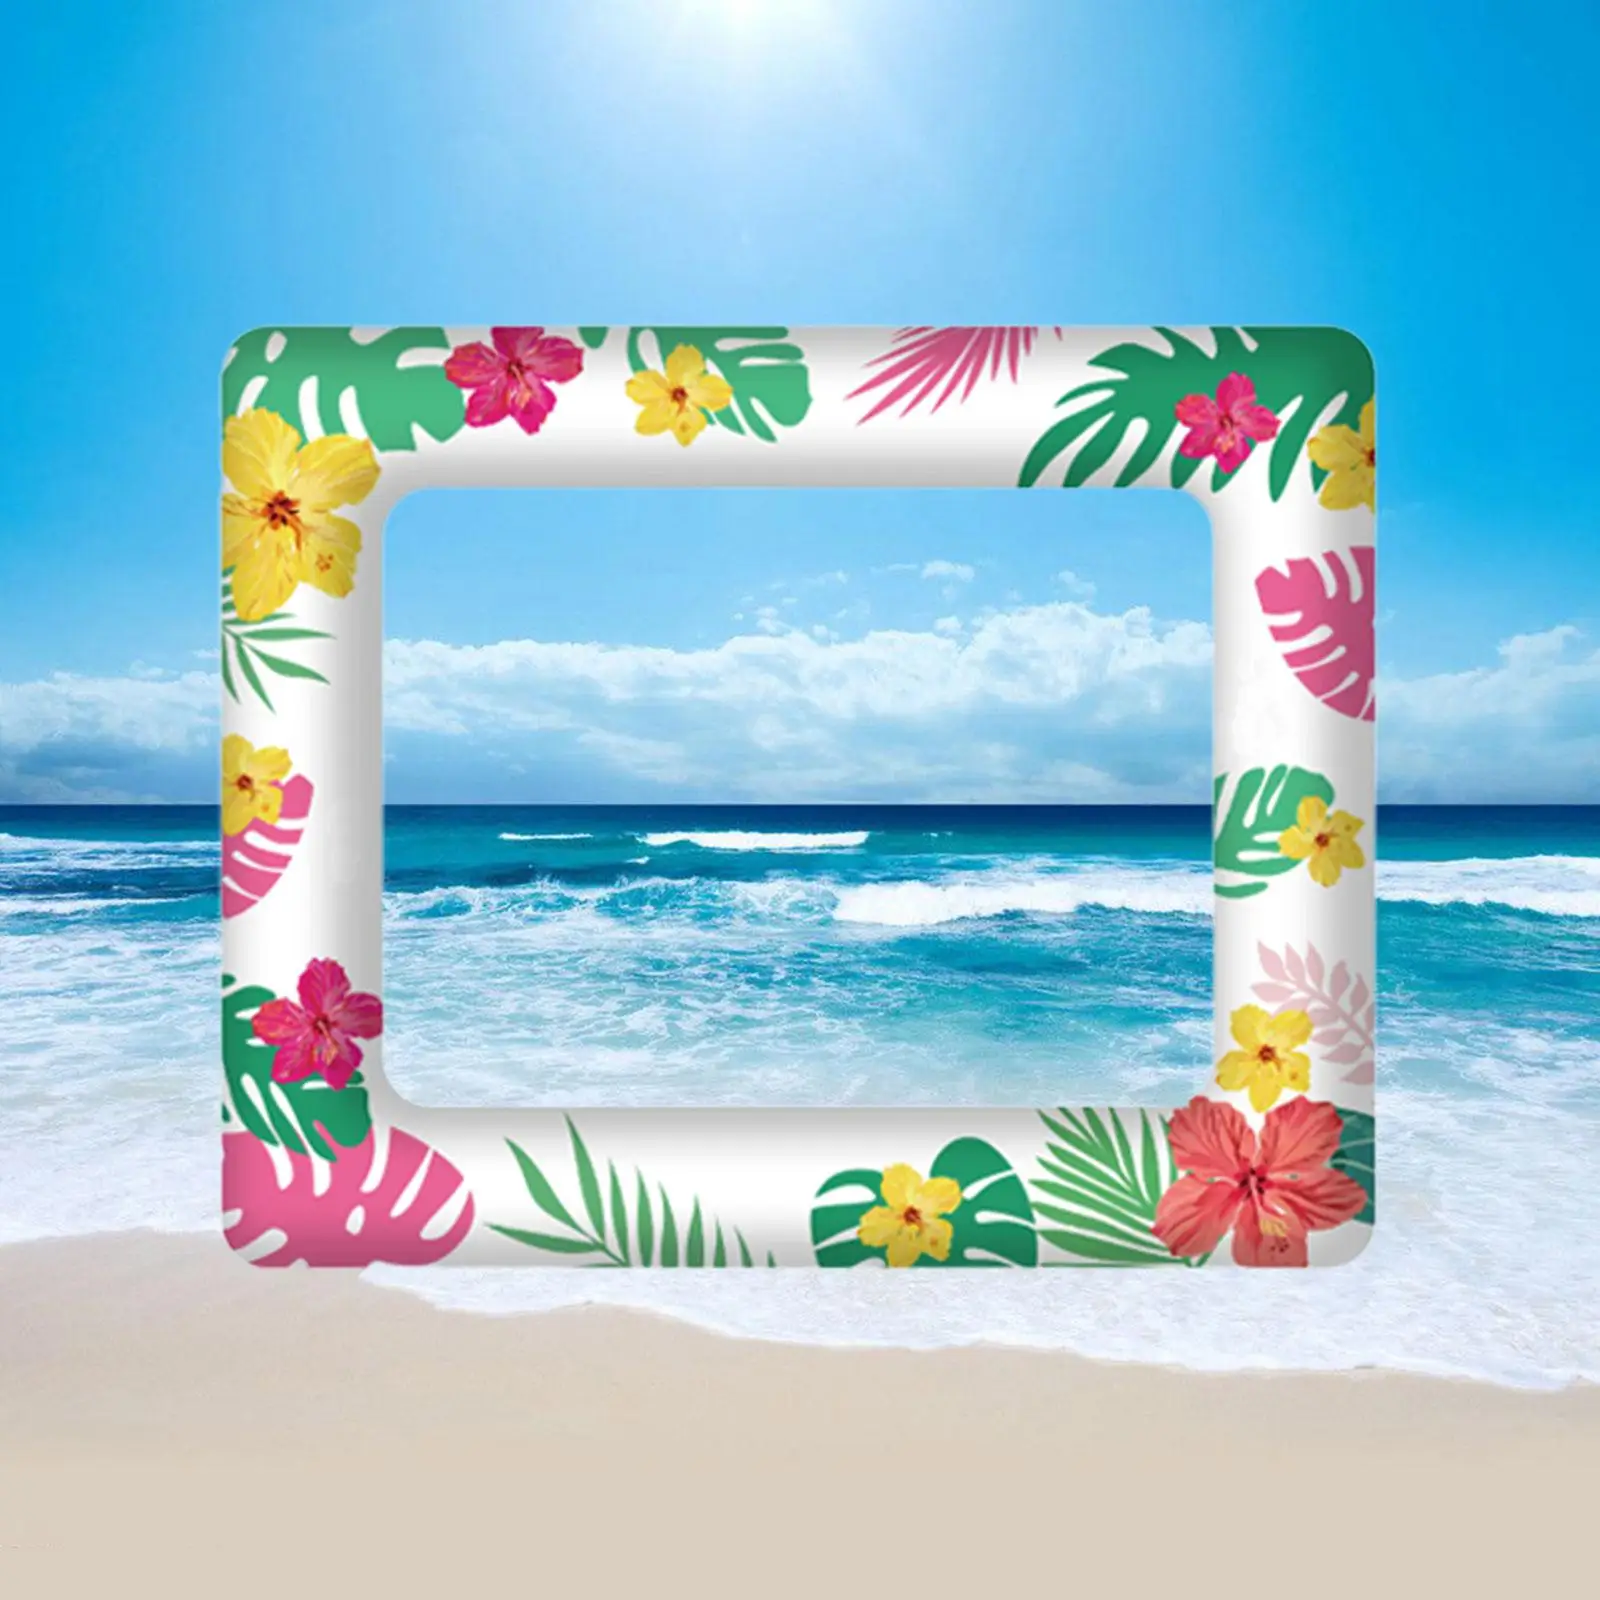 Inflatable Photo Frame Multipurpose Summer Photo Booth Frame Selfie Photo Frame for Friends Carnival Family Wedding Graduation